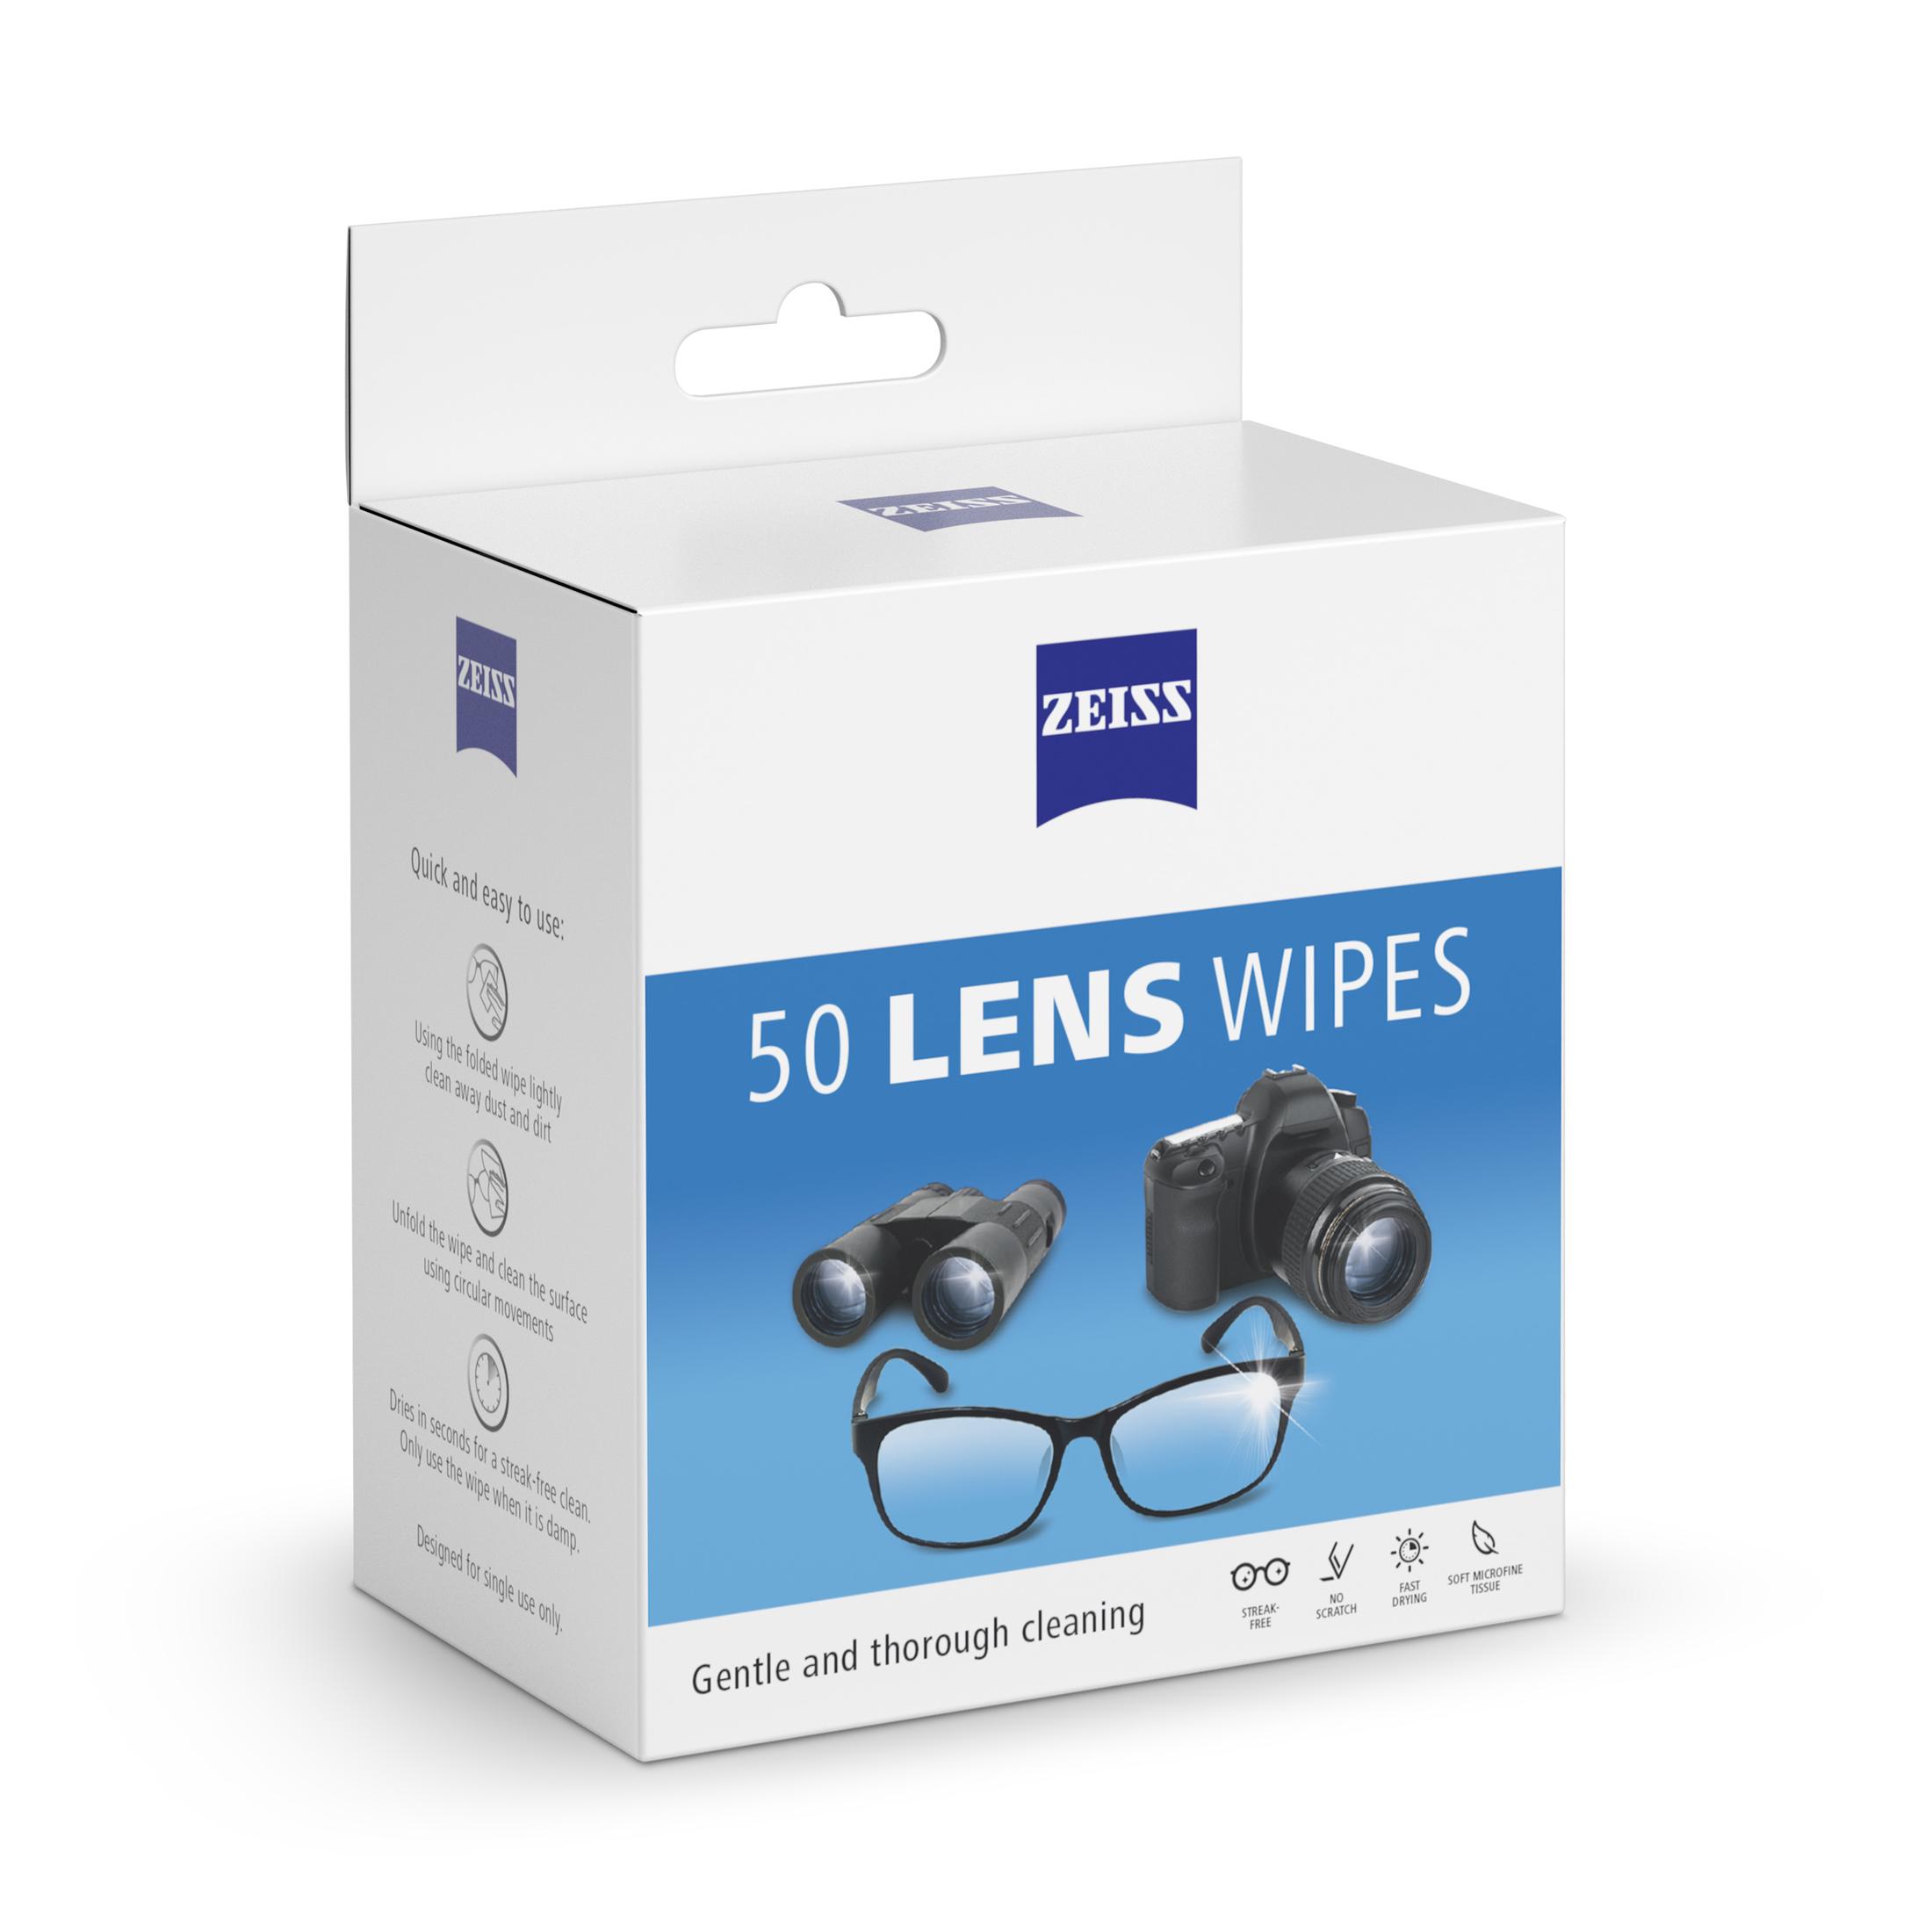 ZEISS Gentle and Thorough Cleaning Eyeglass Lens Cleaner Wipes, 50 Count - image 4 of 6